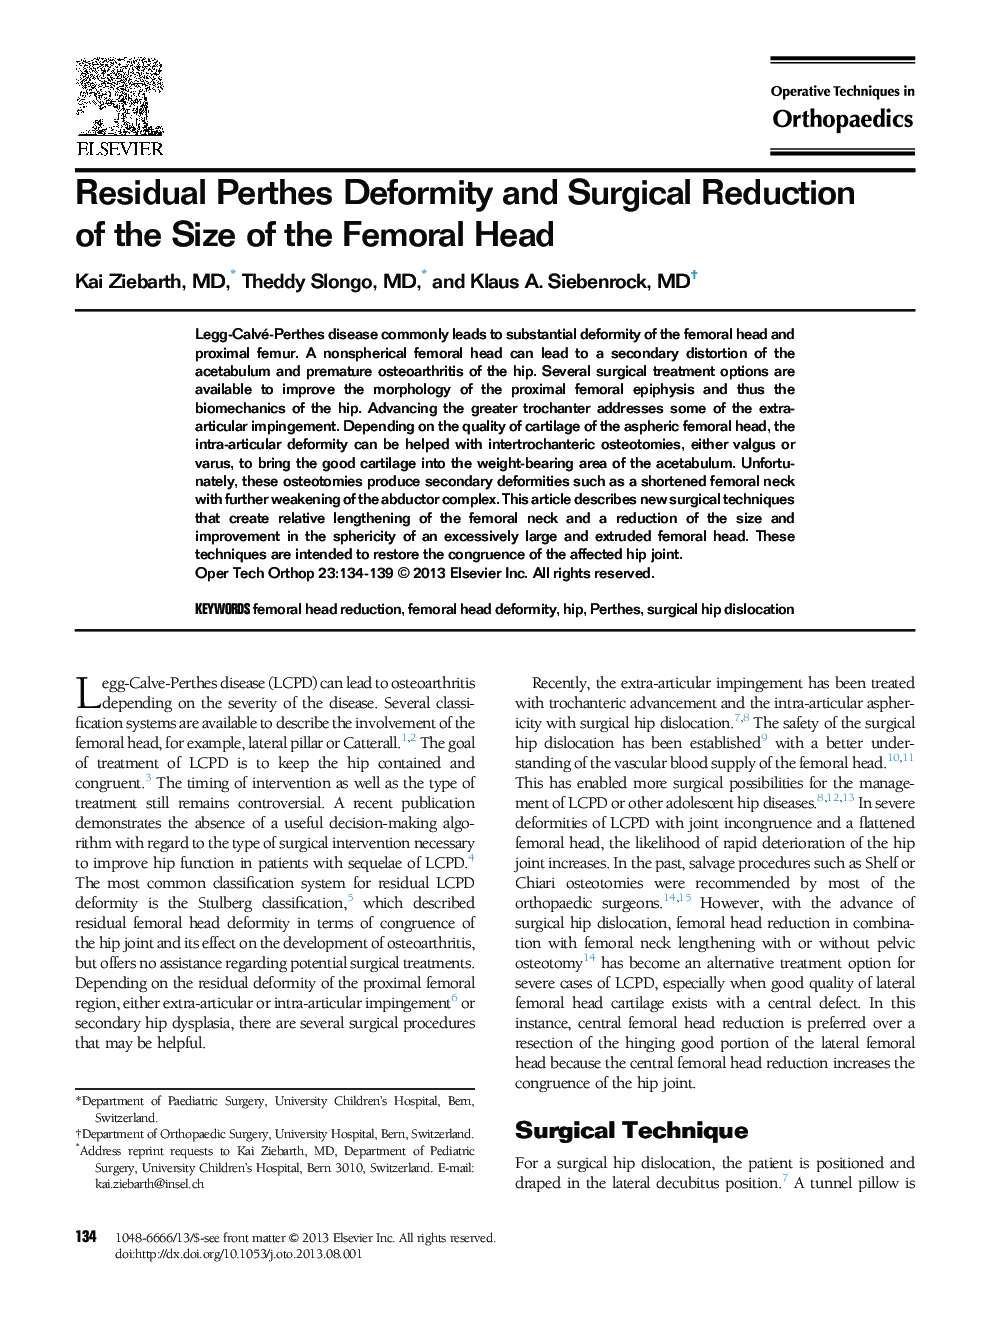 Residual Perthes Deformity and Surgical Reduction of the Size of the Femoral Head